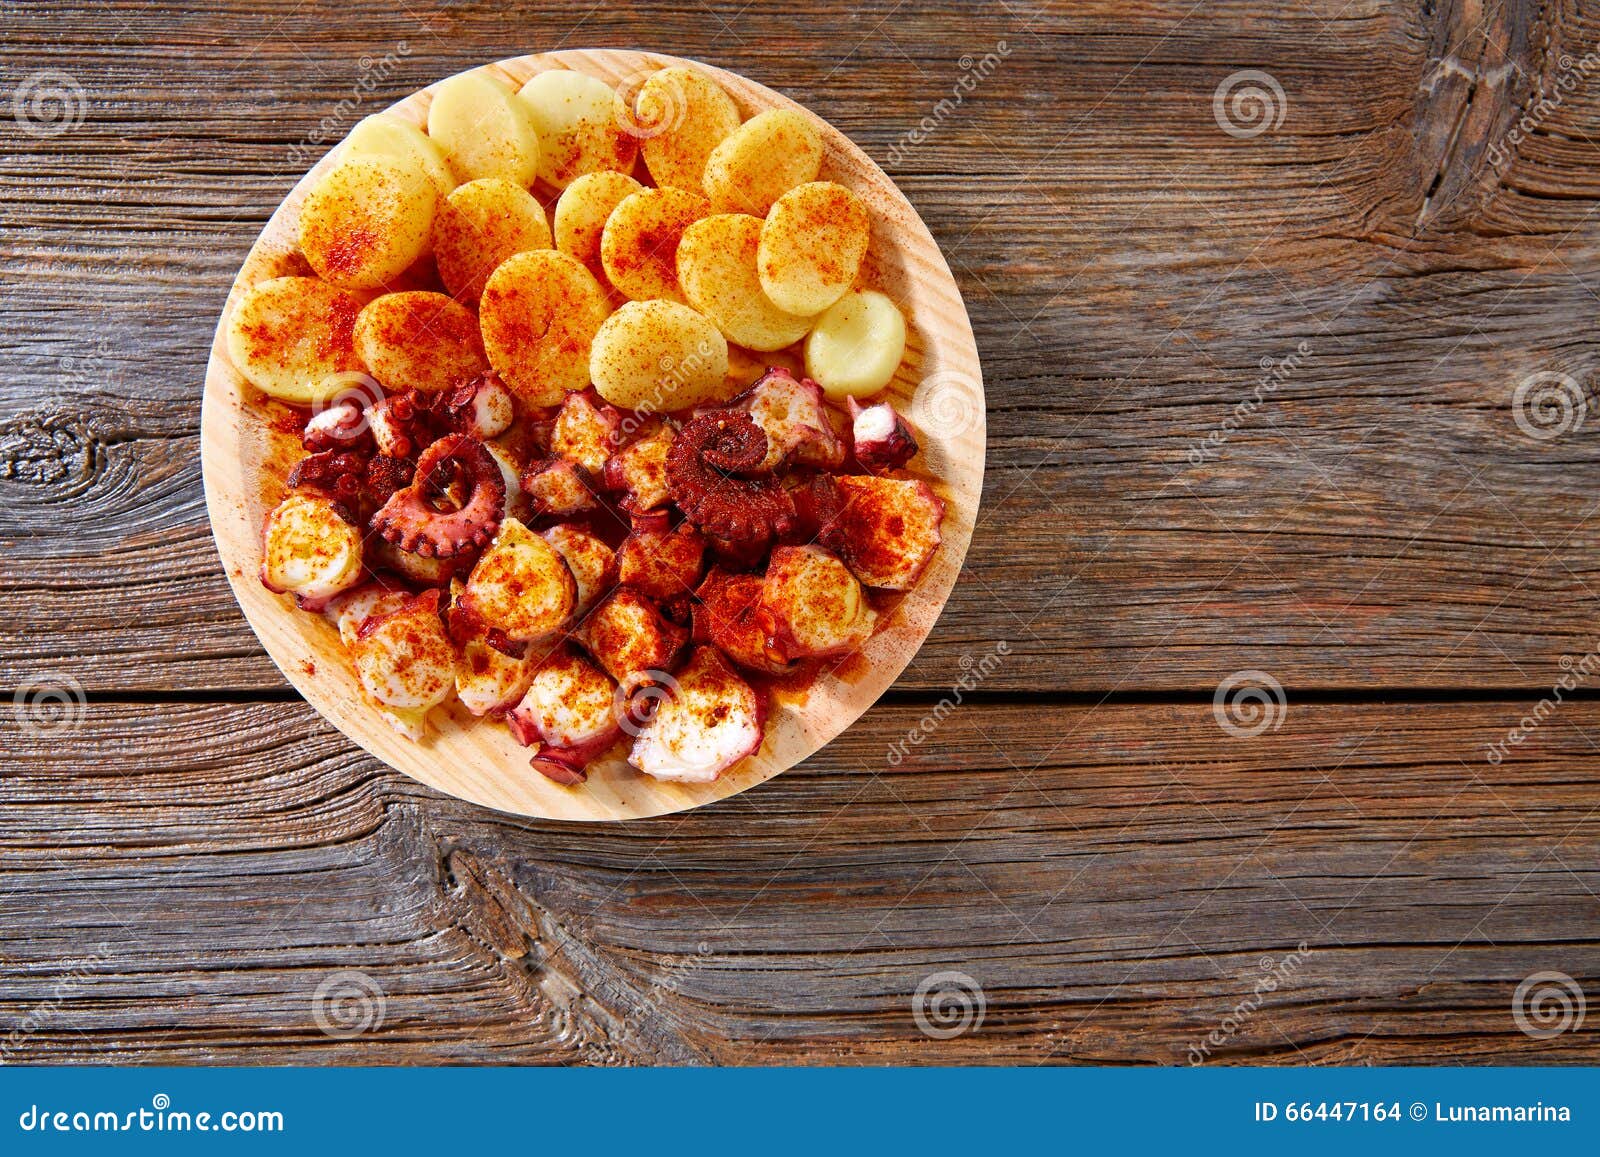 pulpo a feira with octopus potatoes gallega style